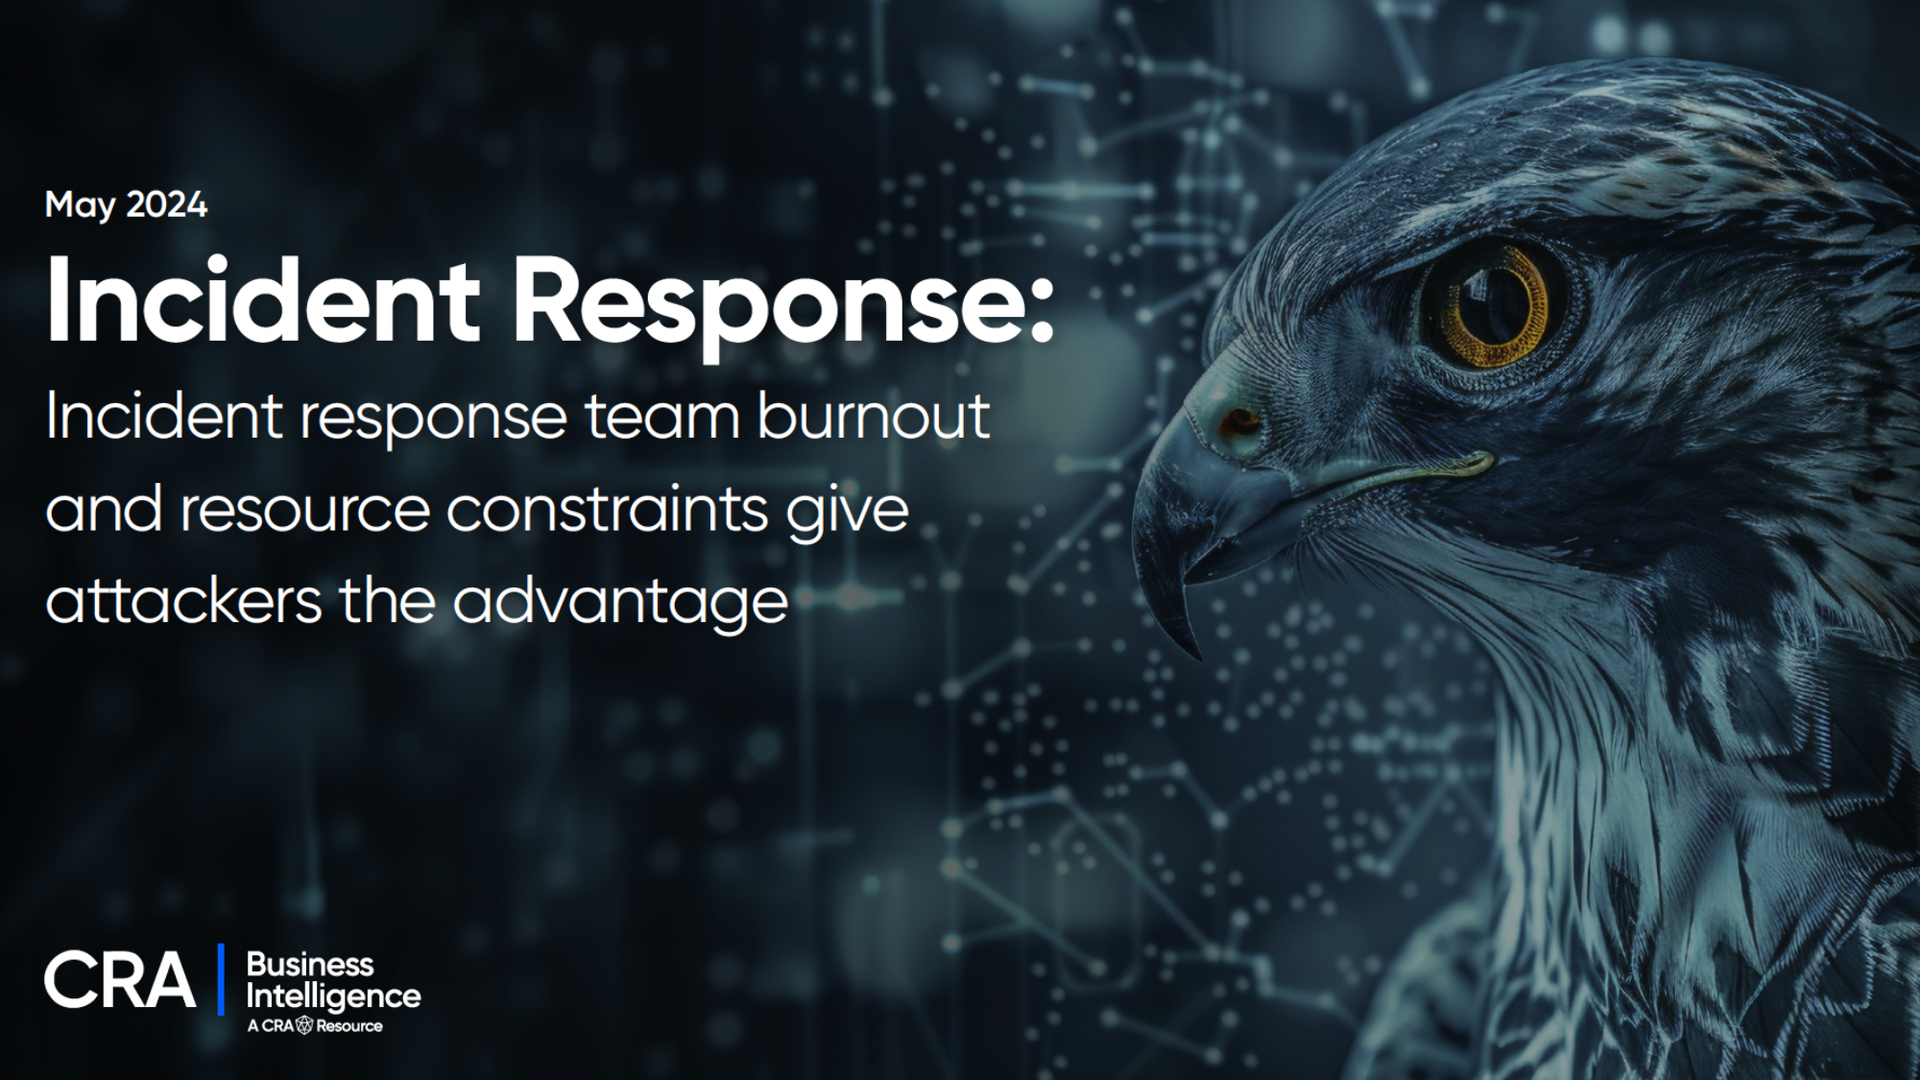 Incident Response team burnout and resource constraints give attackers the advantage